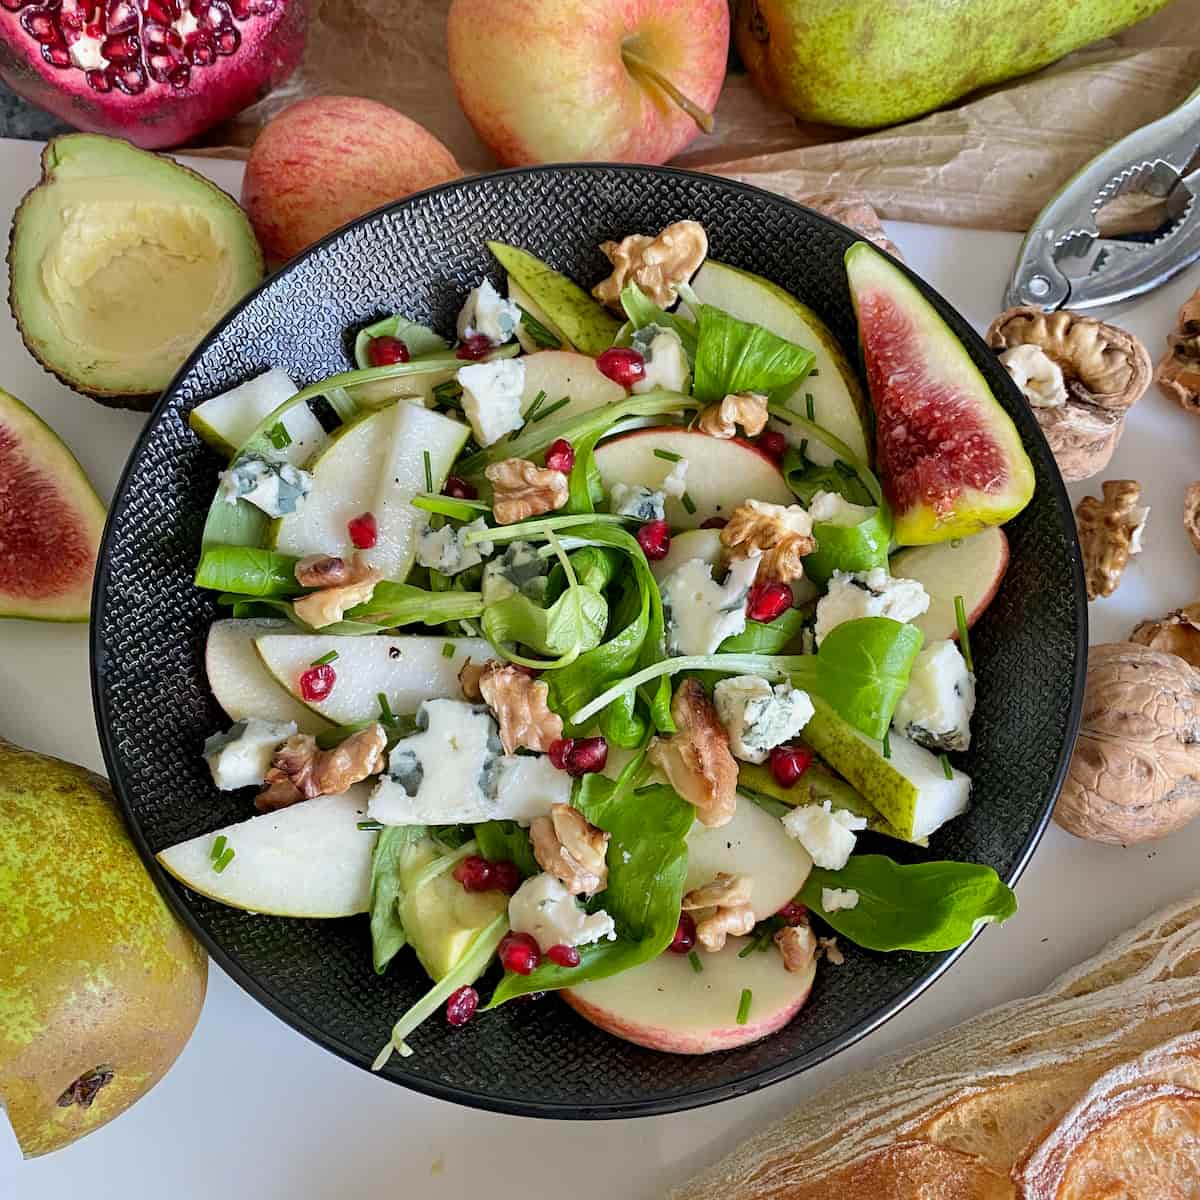 blue cheese crumbled into a green salad with pear, apple and walnuts